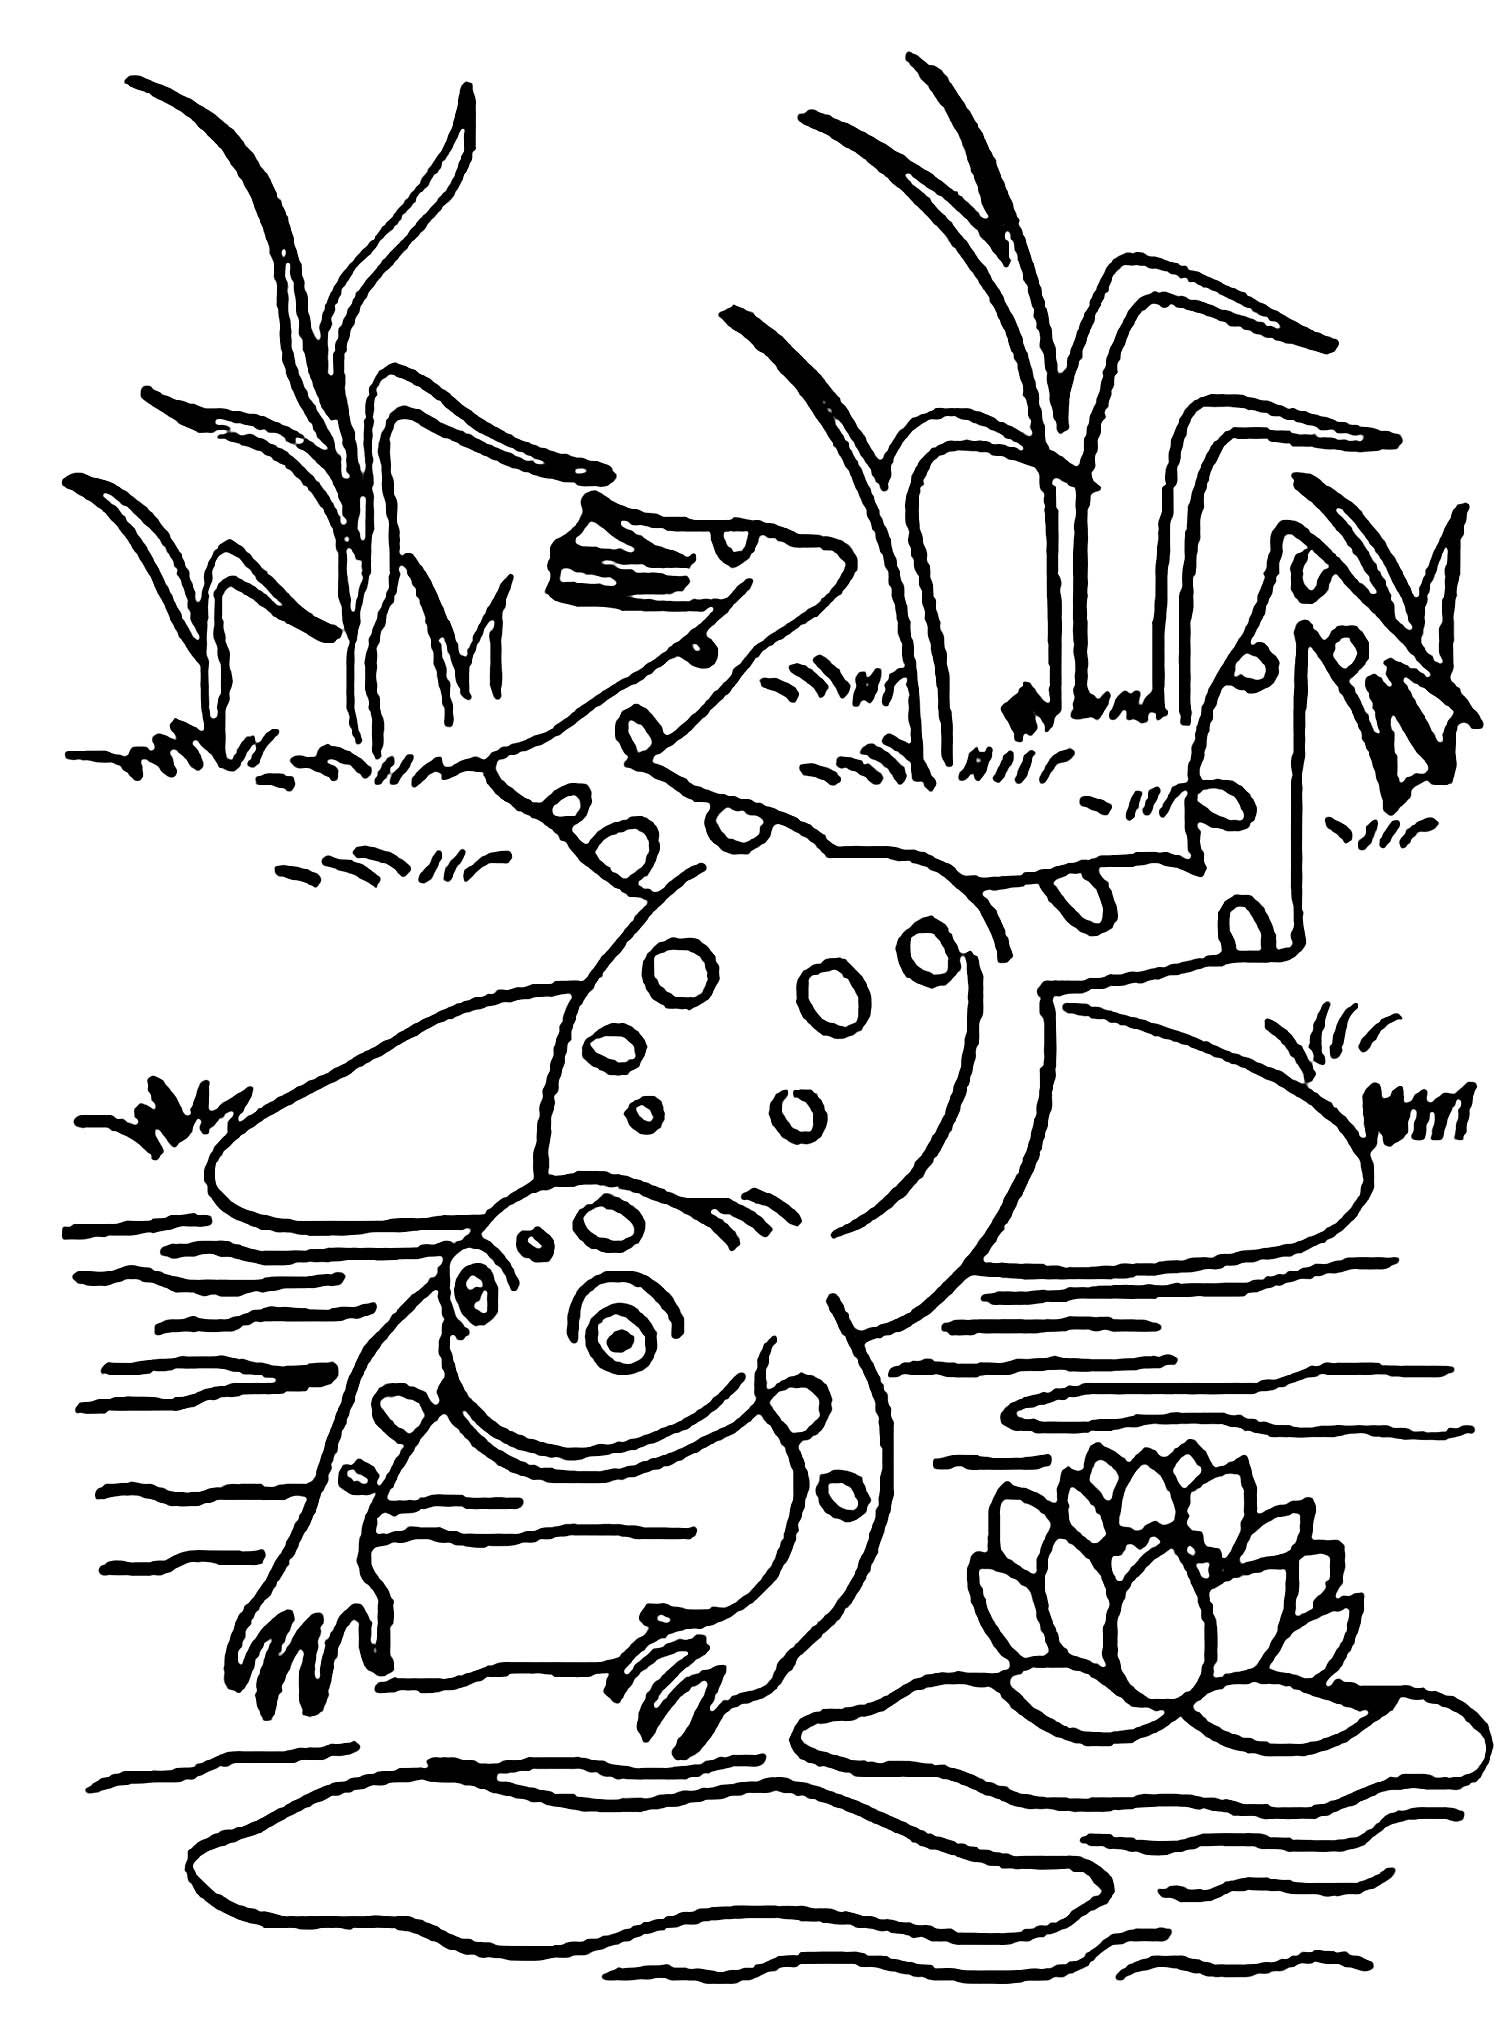 Simple frog coloring for kids